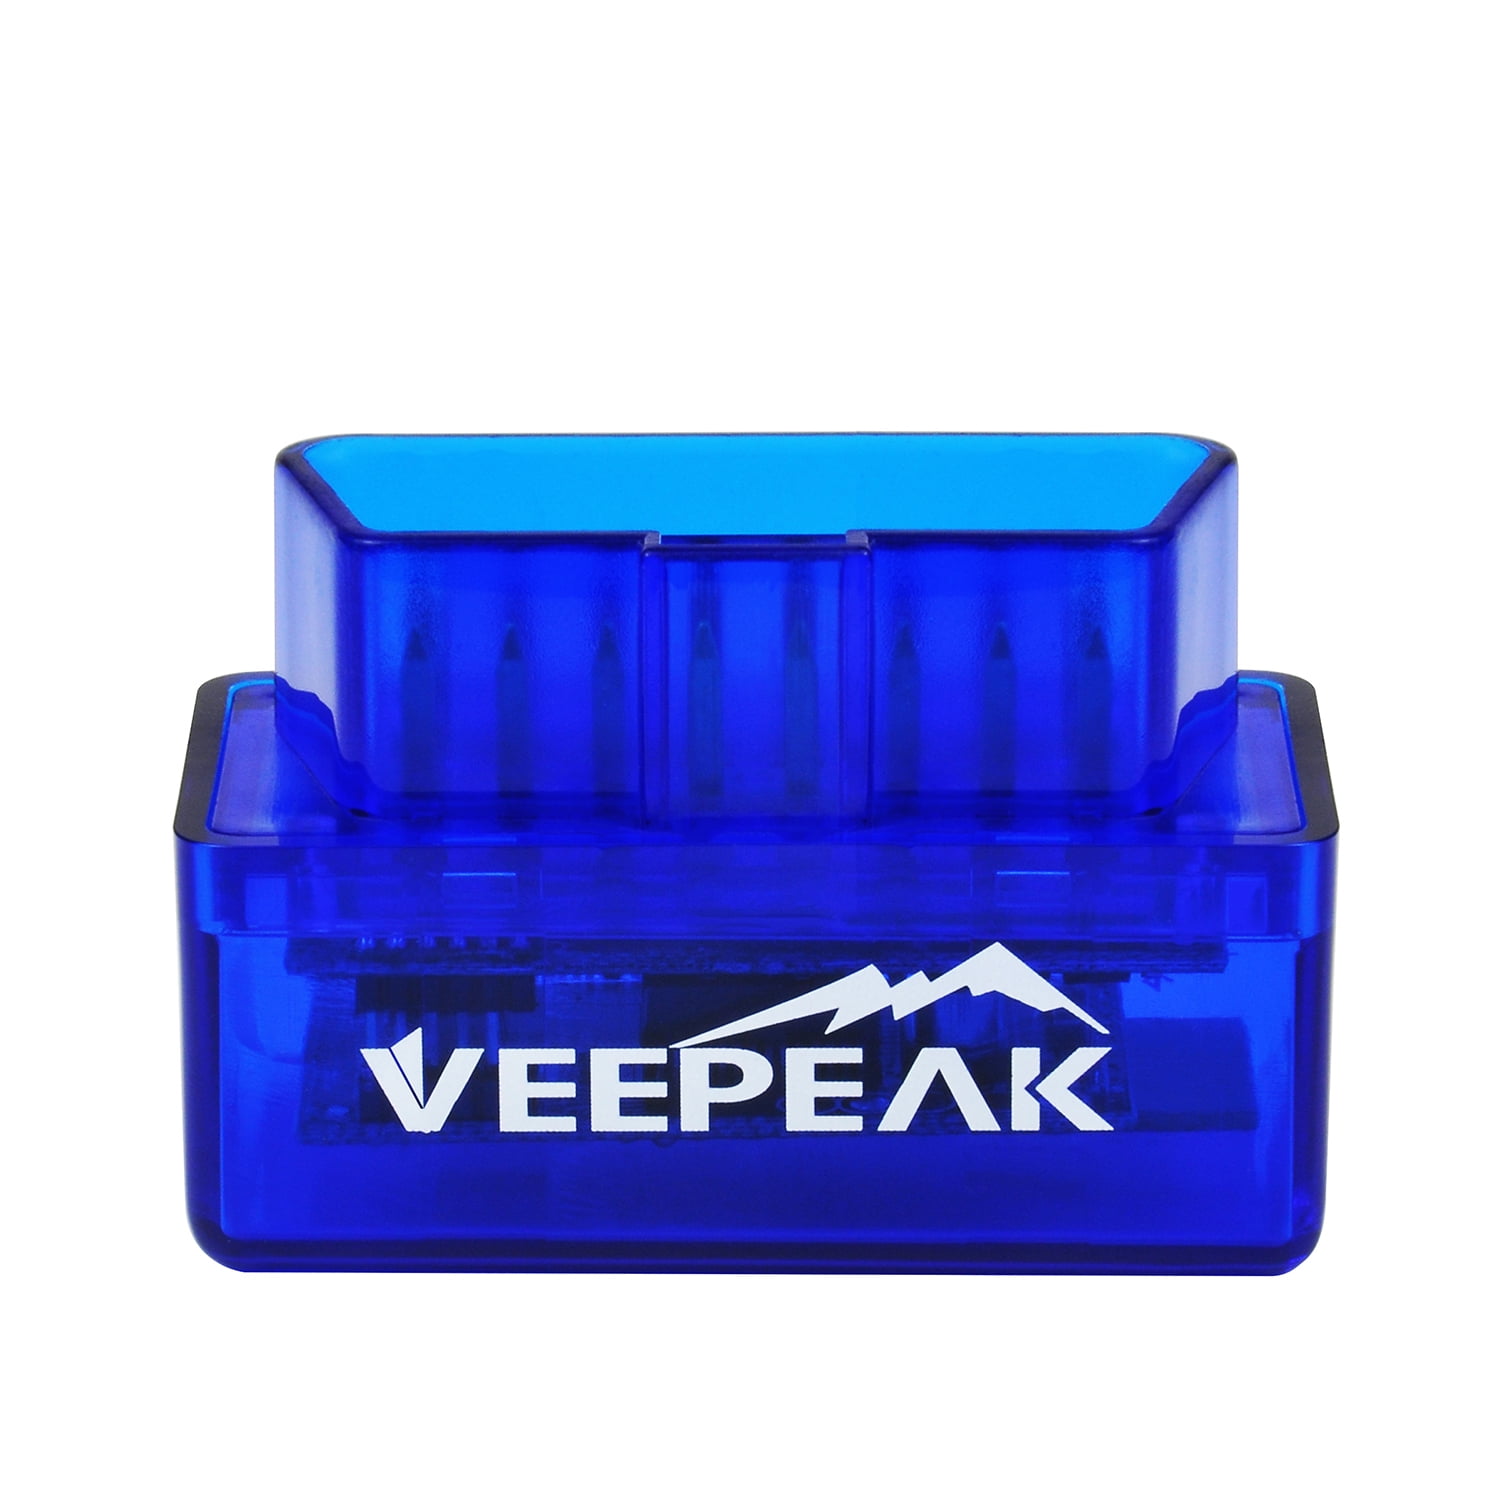 Veepeak Mini Bluetooth OBD2 Scanner OBD II Car Diagnostic Scan Tool for Android & Windows DashCommand Car Scanner App OBD Fusion Supports Torque Pro/Lite Check Engine Light Code Reader 